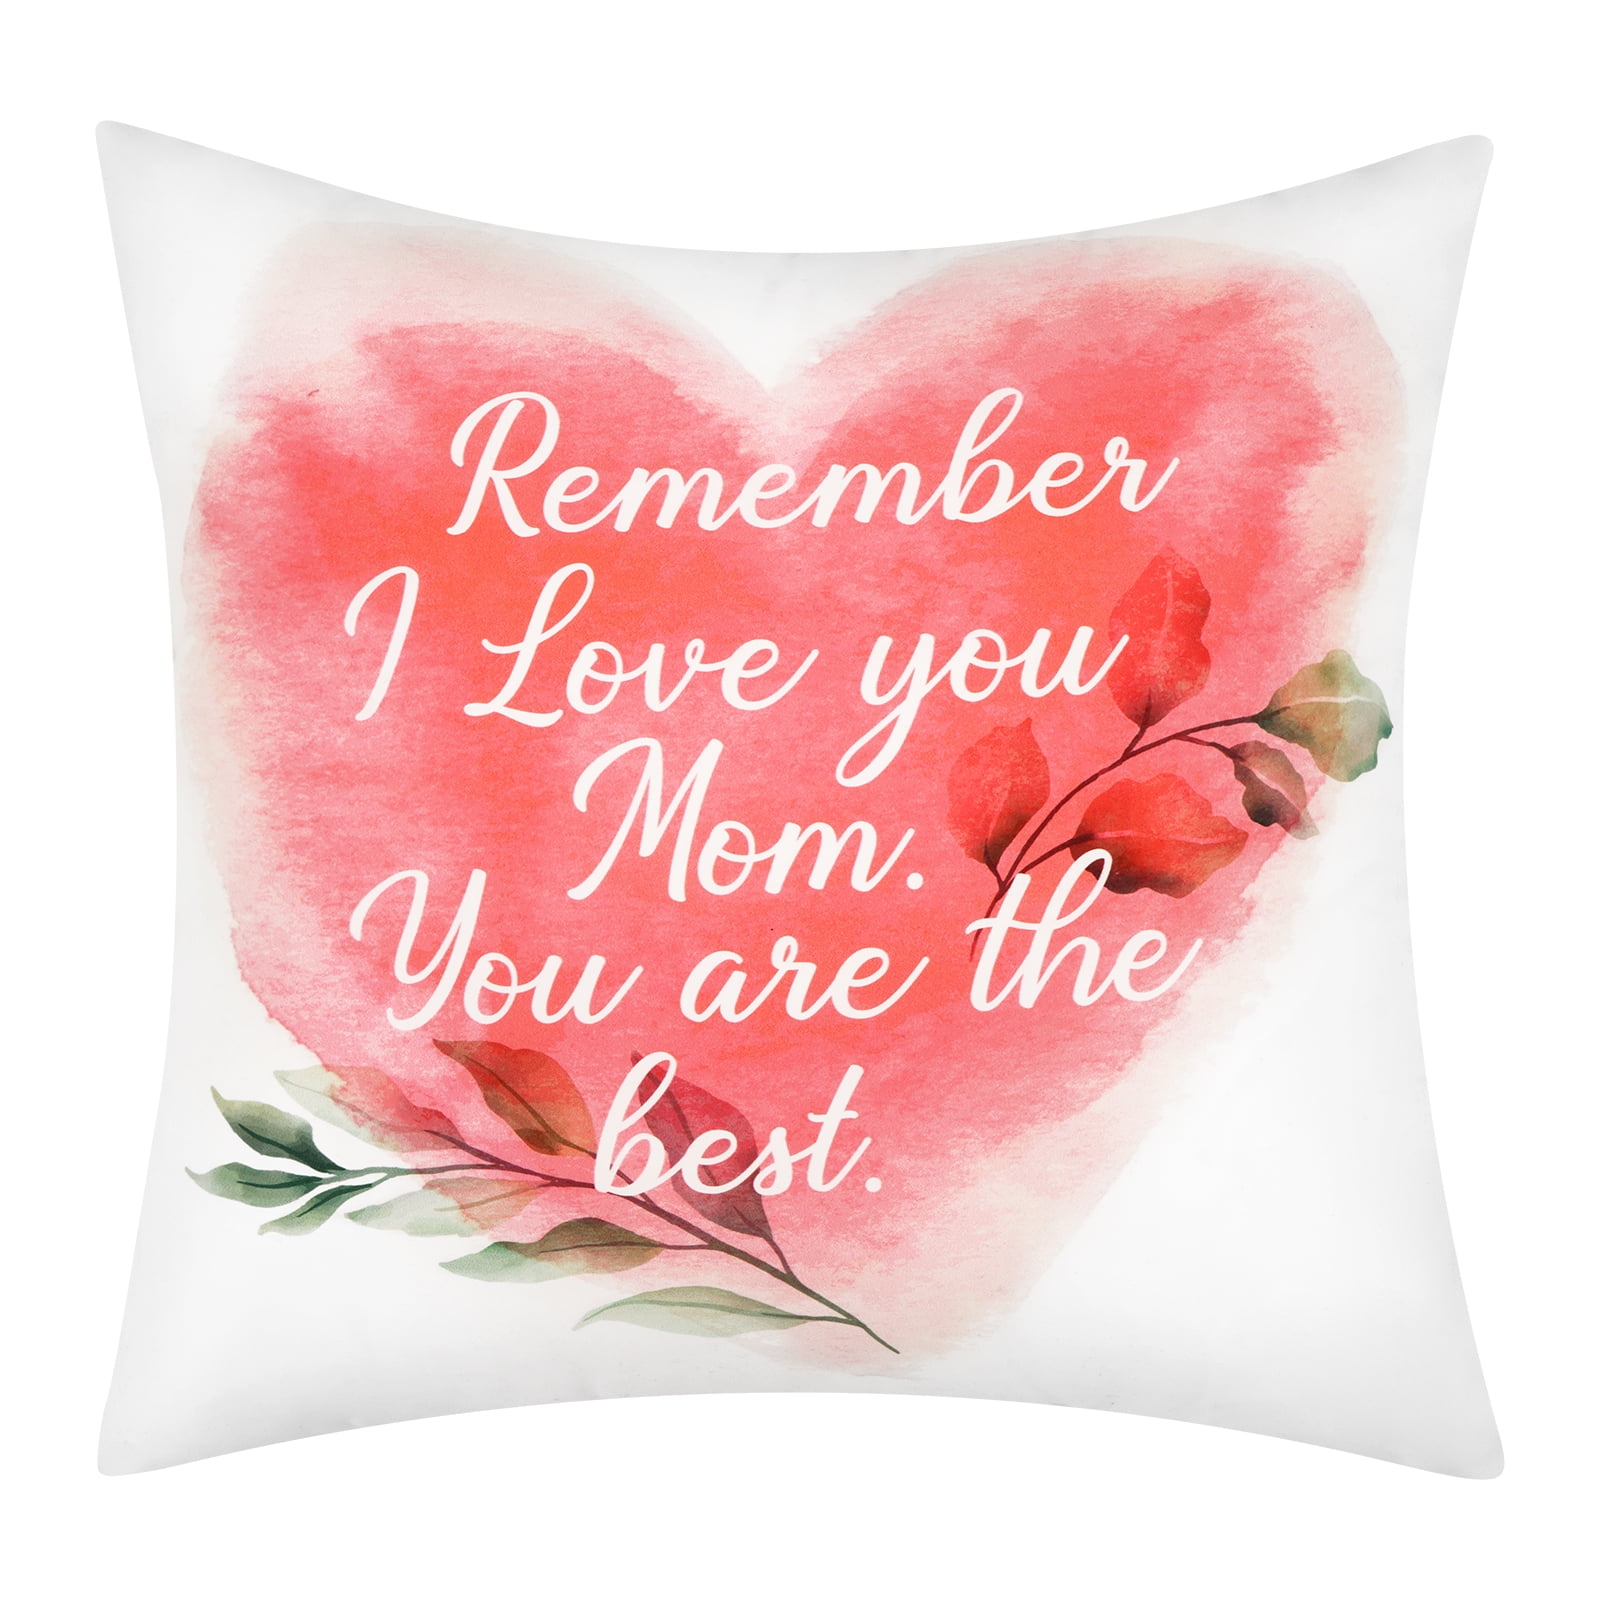 Details about   Red Flower Heart Love Pillowcase Decorative Cushion Cover Pillowcase Home Decor